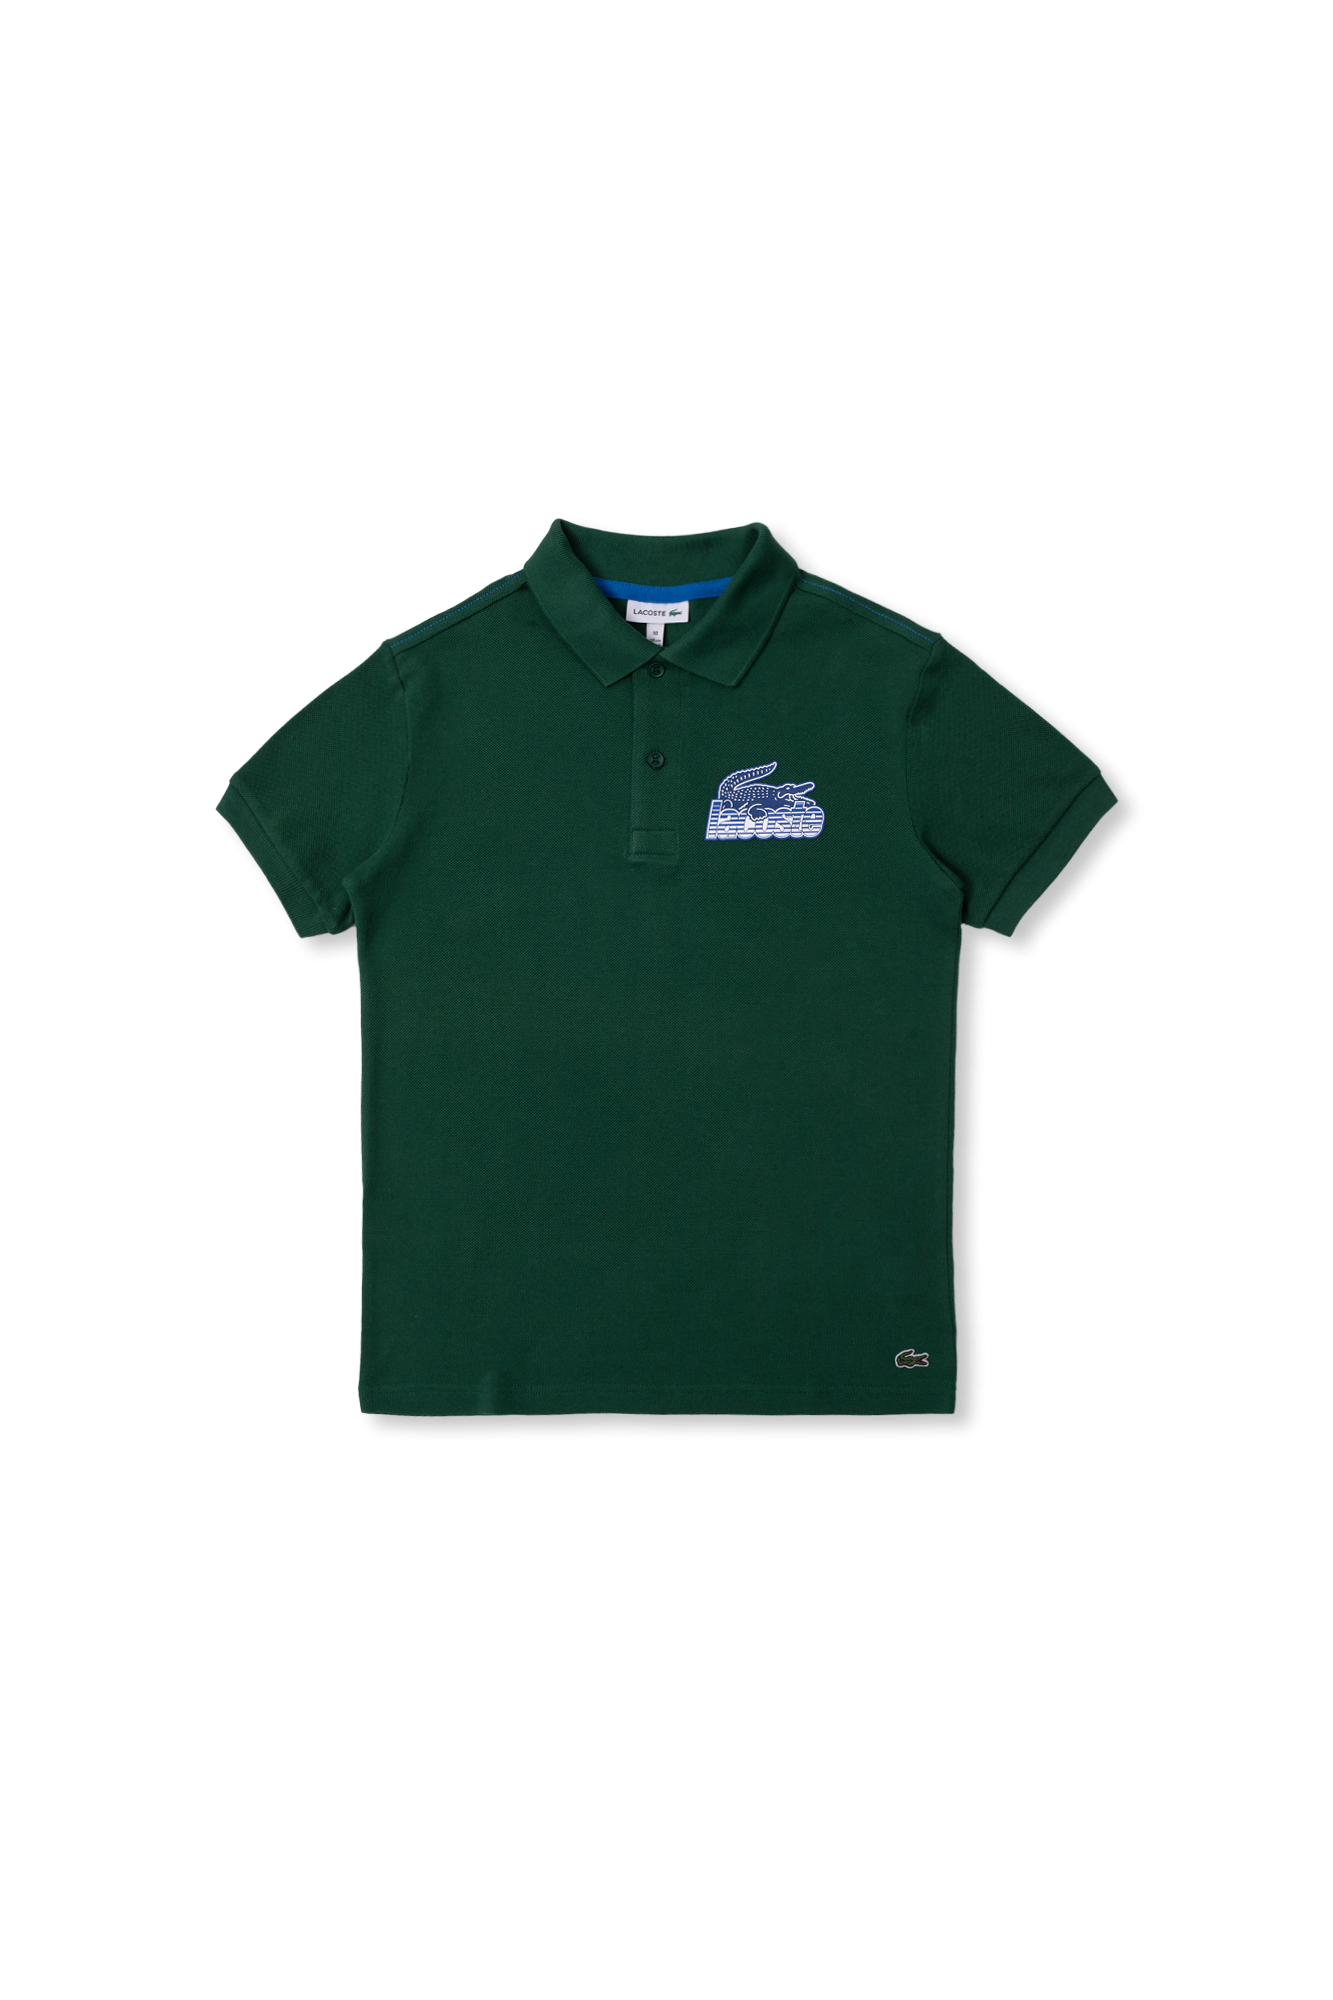 Green Polo Rugby Cotton with logo Lacoste Kids - IetpShops Bahamas - Polo  Rugby Ralph Lauren icon logo crew neck sweatCotton in black